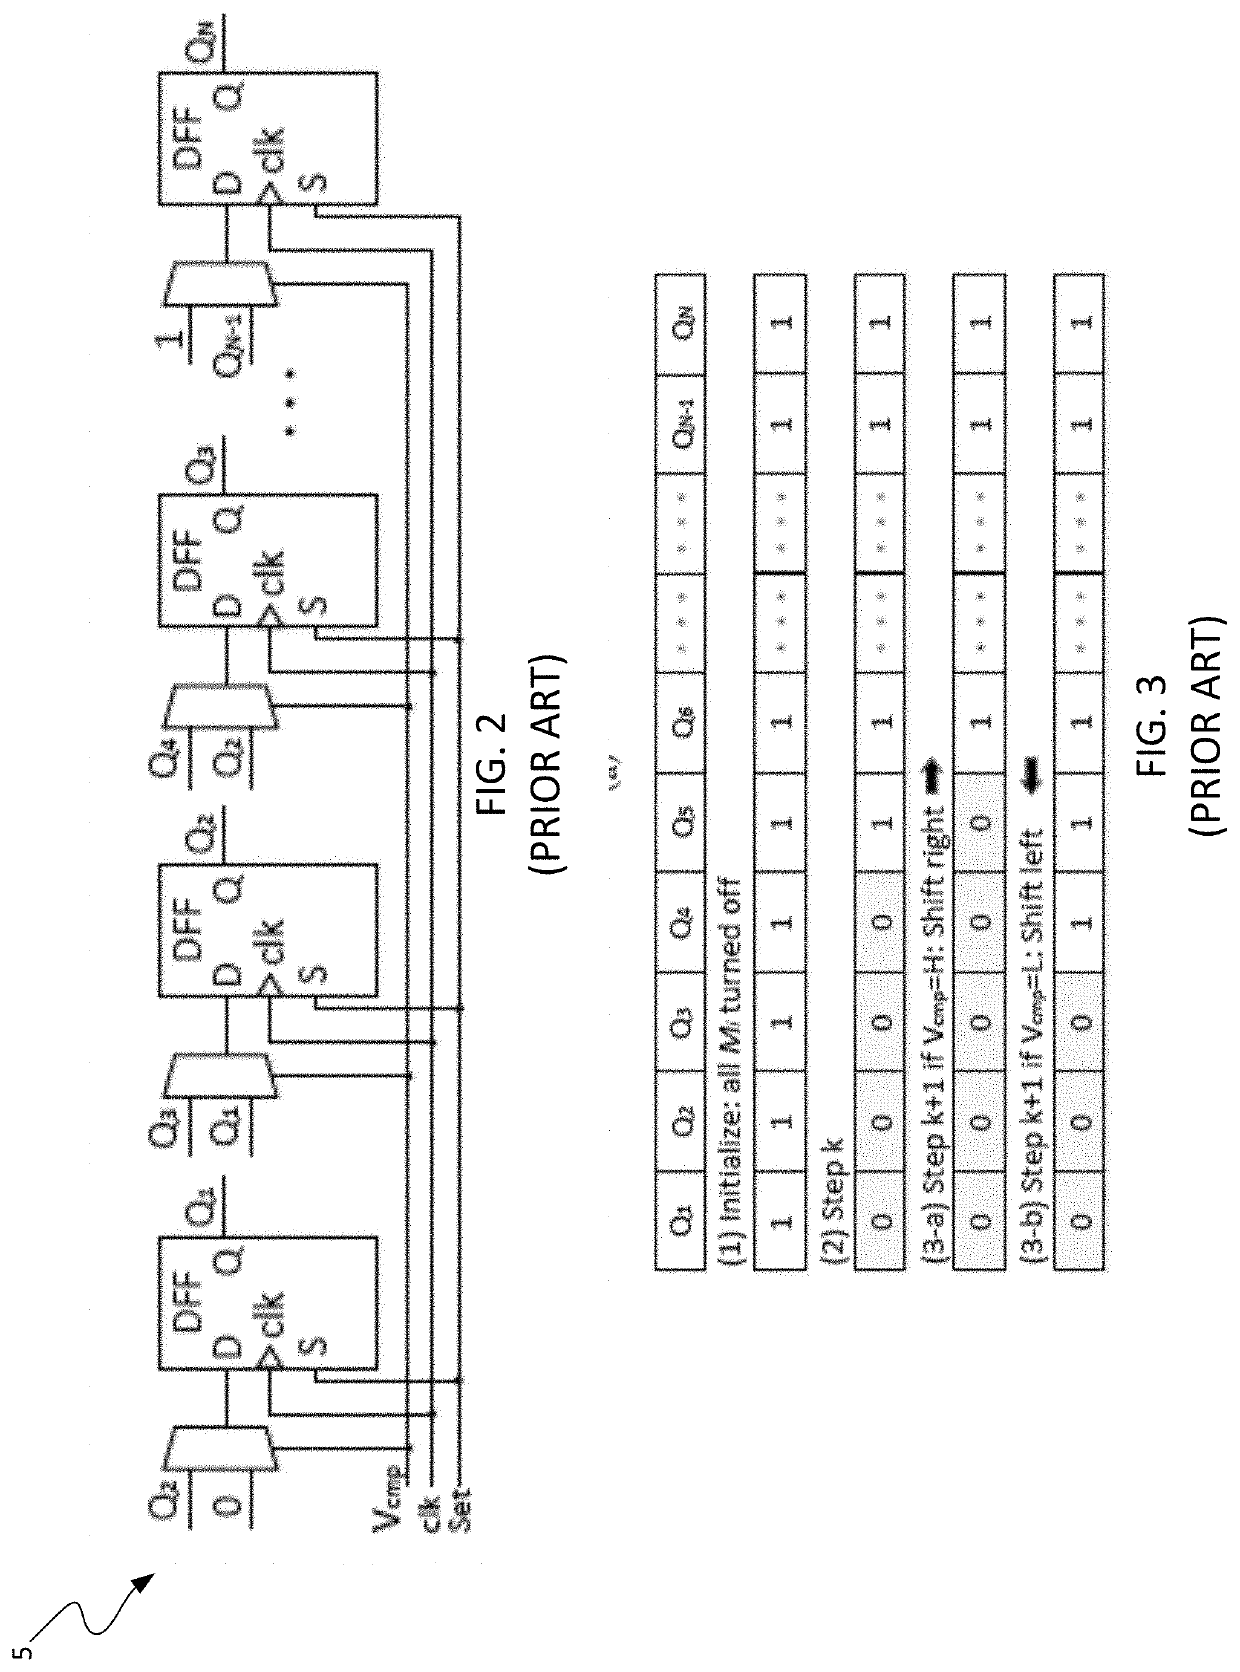 Method and apparatus for mitigating performance degradation in digital low-dropout voltage regulators (DLDOs) caused by limit cycle oscillation (LCO) and other factors